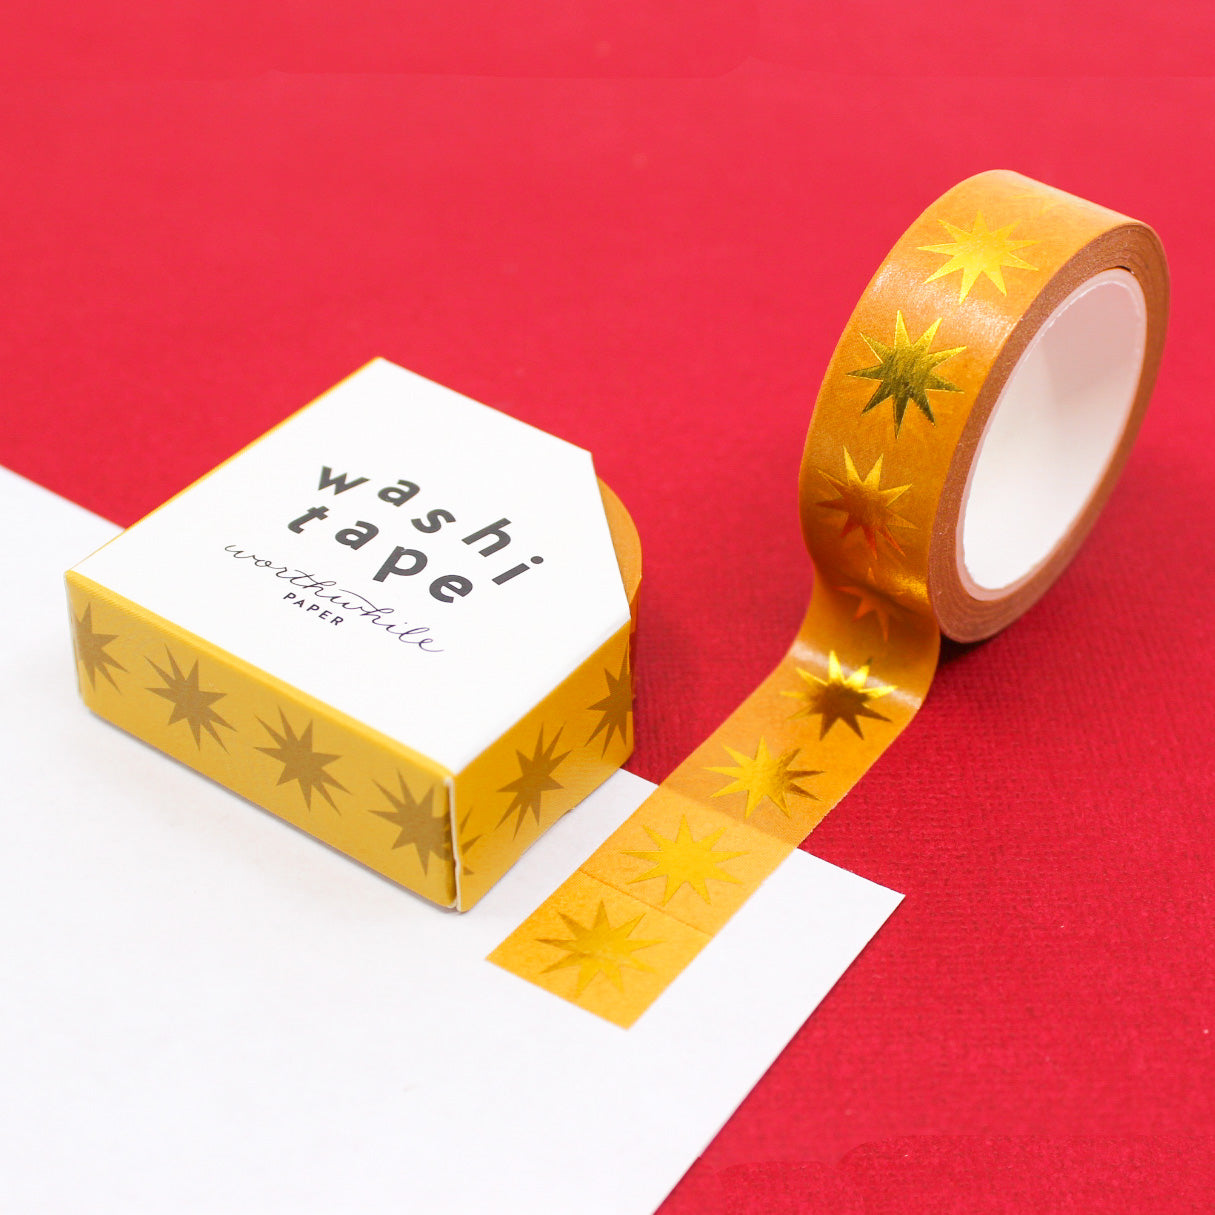 Add a touch of timeless glamour to your projects with our Retro Gold Star Washi Tape. This tape features a classic design of golden stars against a yellow Ochre backdrop. giving your creations a touch of vintage elegance. Perfect for embellishing scrapbooks, planners, or crafting personalized cards, this washi tape brings a nostalgic charm. This tape is from Worthwhile Paper and sold at BBB Supplies Craft Shop.